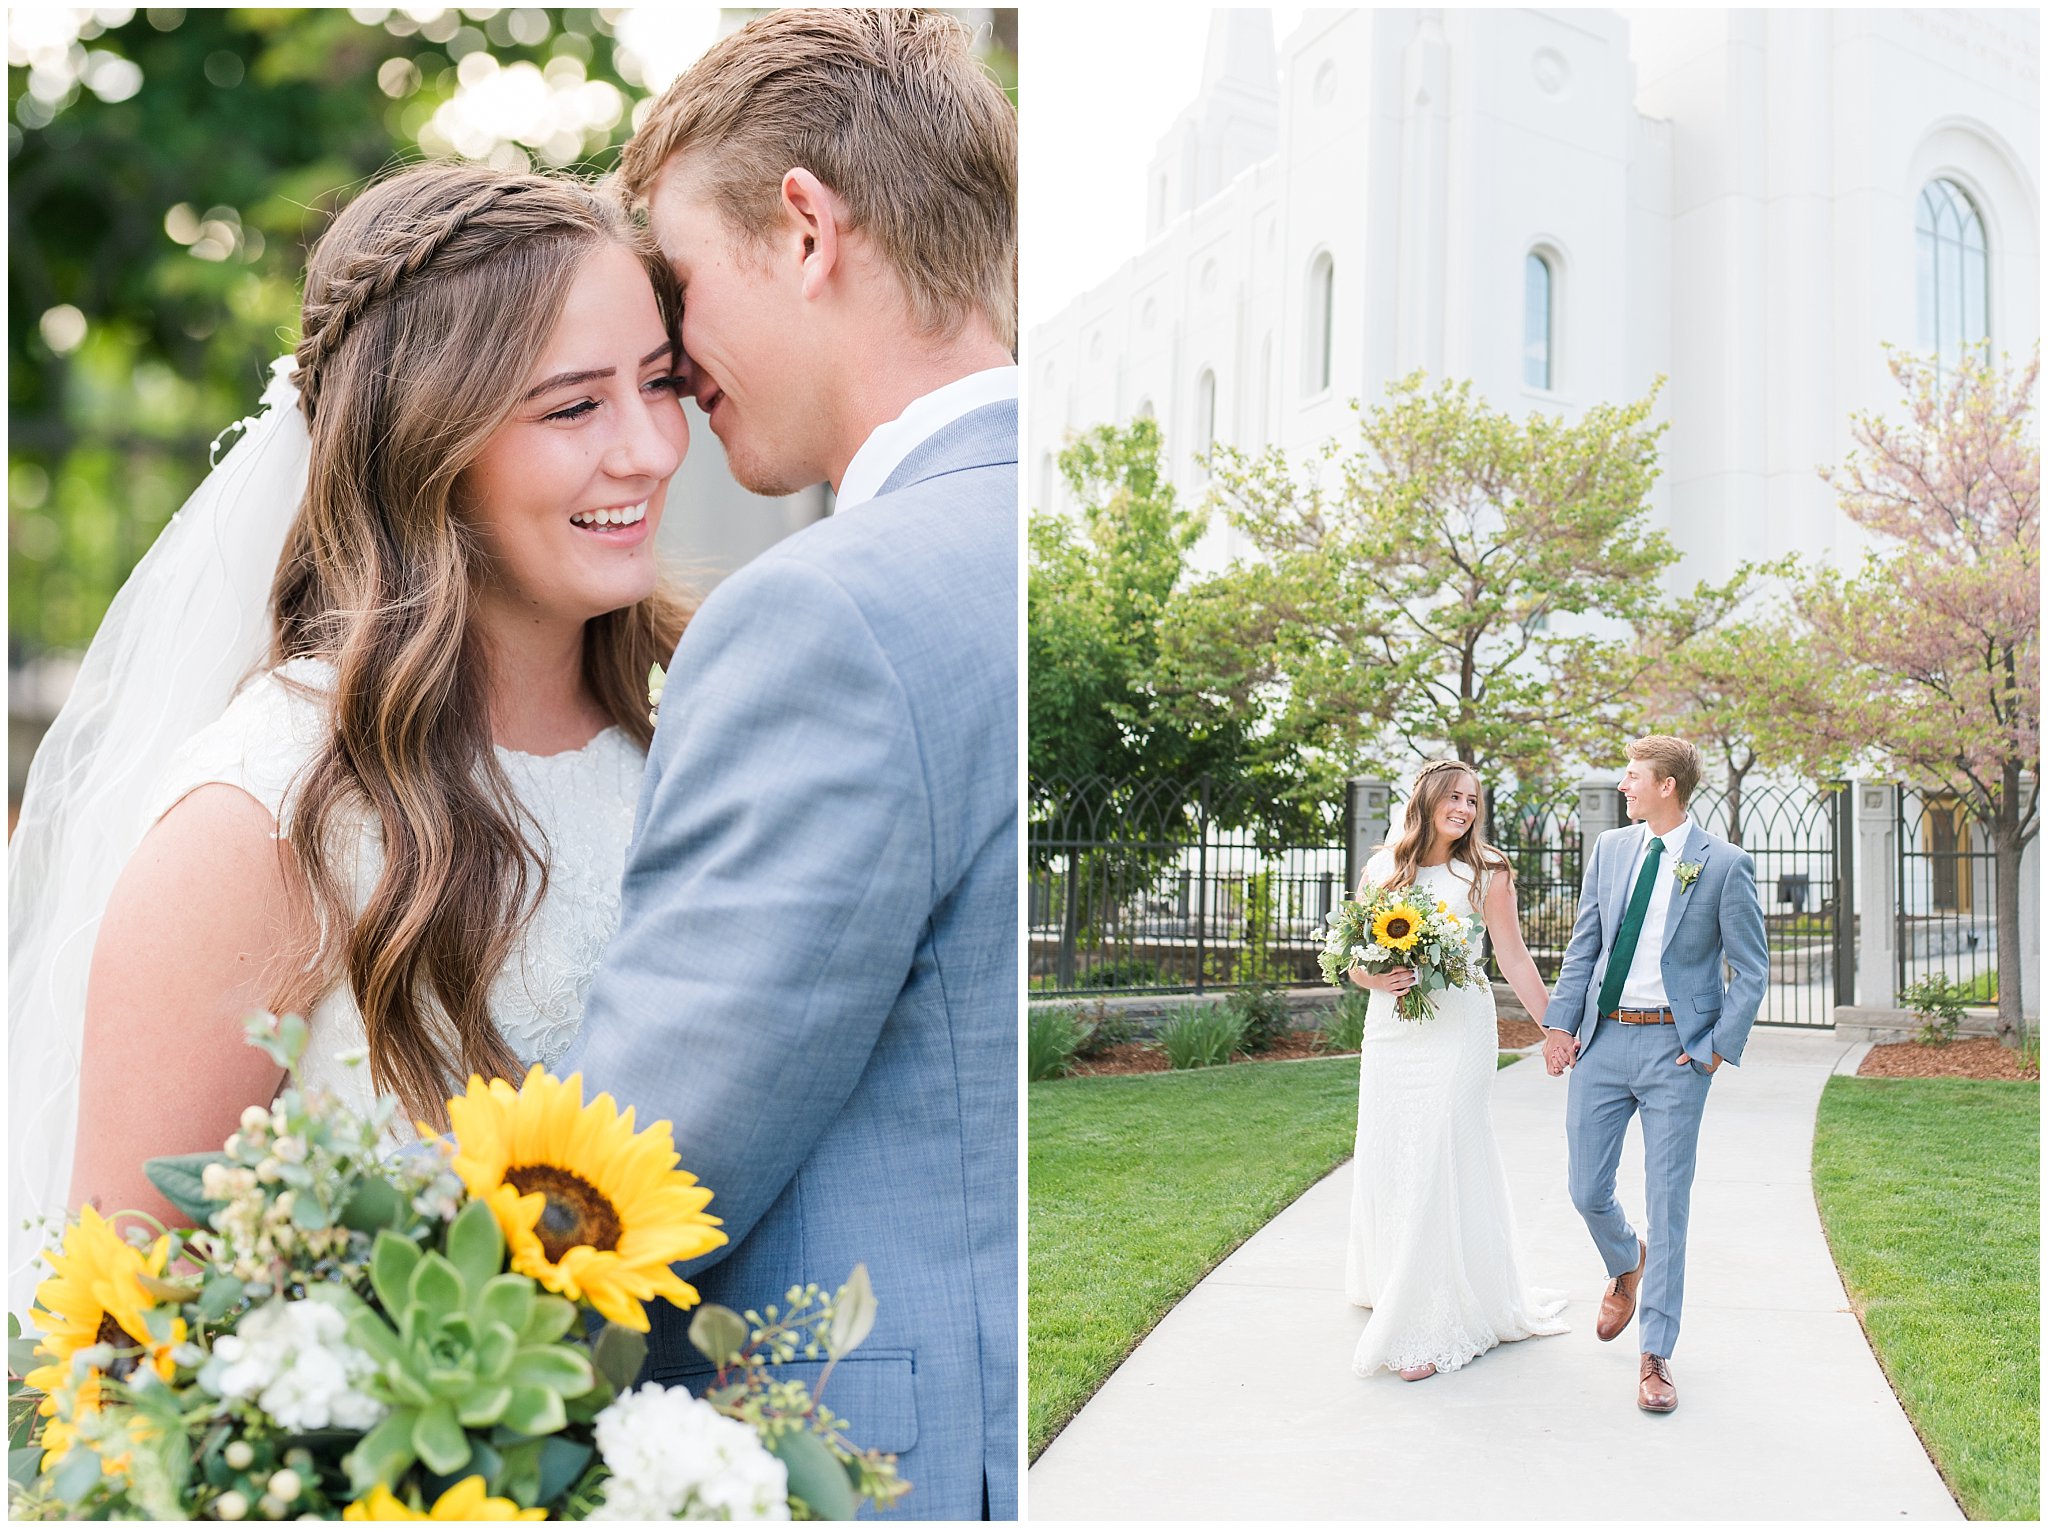 Bride with sunflower and succulent bouquet and groom in light blue suit at the Brigham City Temple | Brigham City Temple and Mantua Mountain Formal Session | Jessie and Dallin Photography